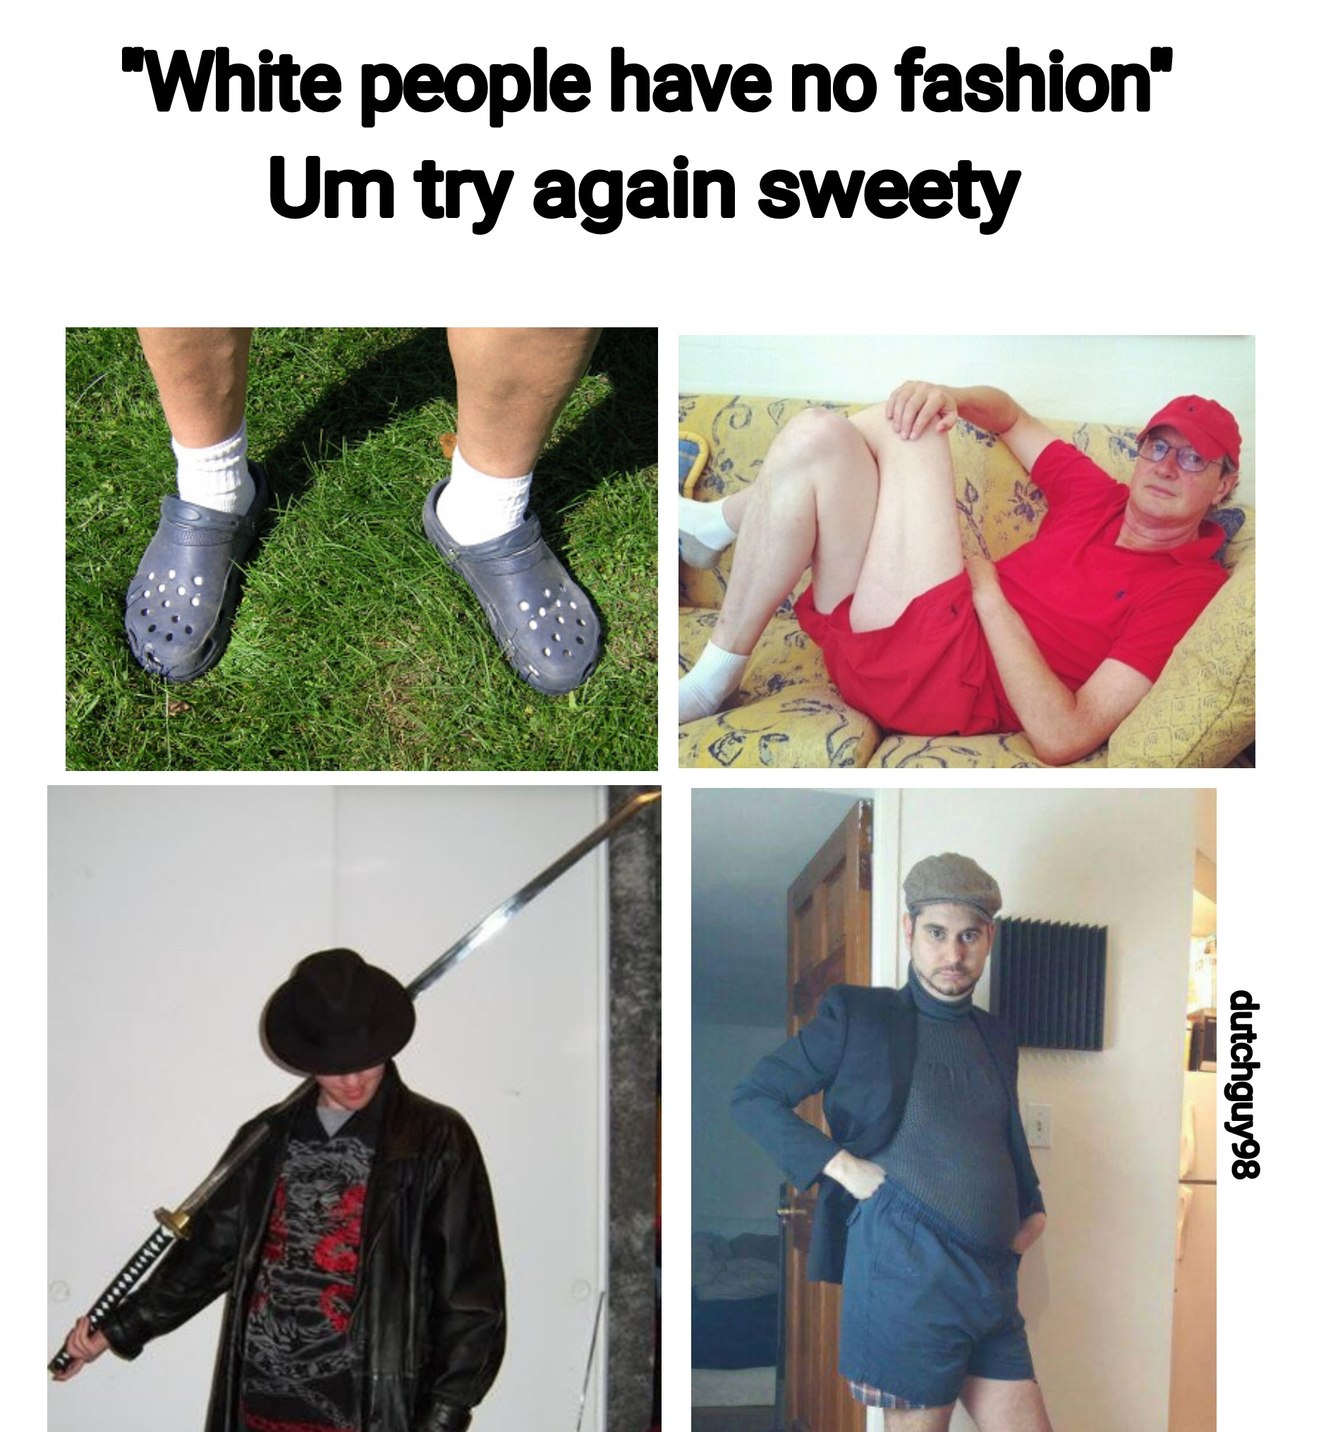 white person starter pack - 'White people have no fashion Um try again sweety dutchguy98